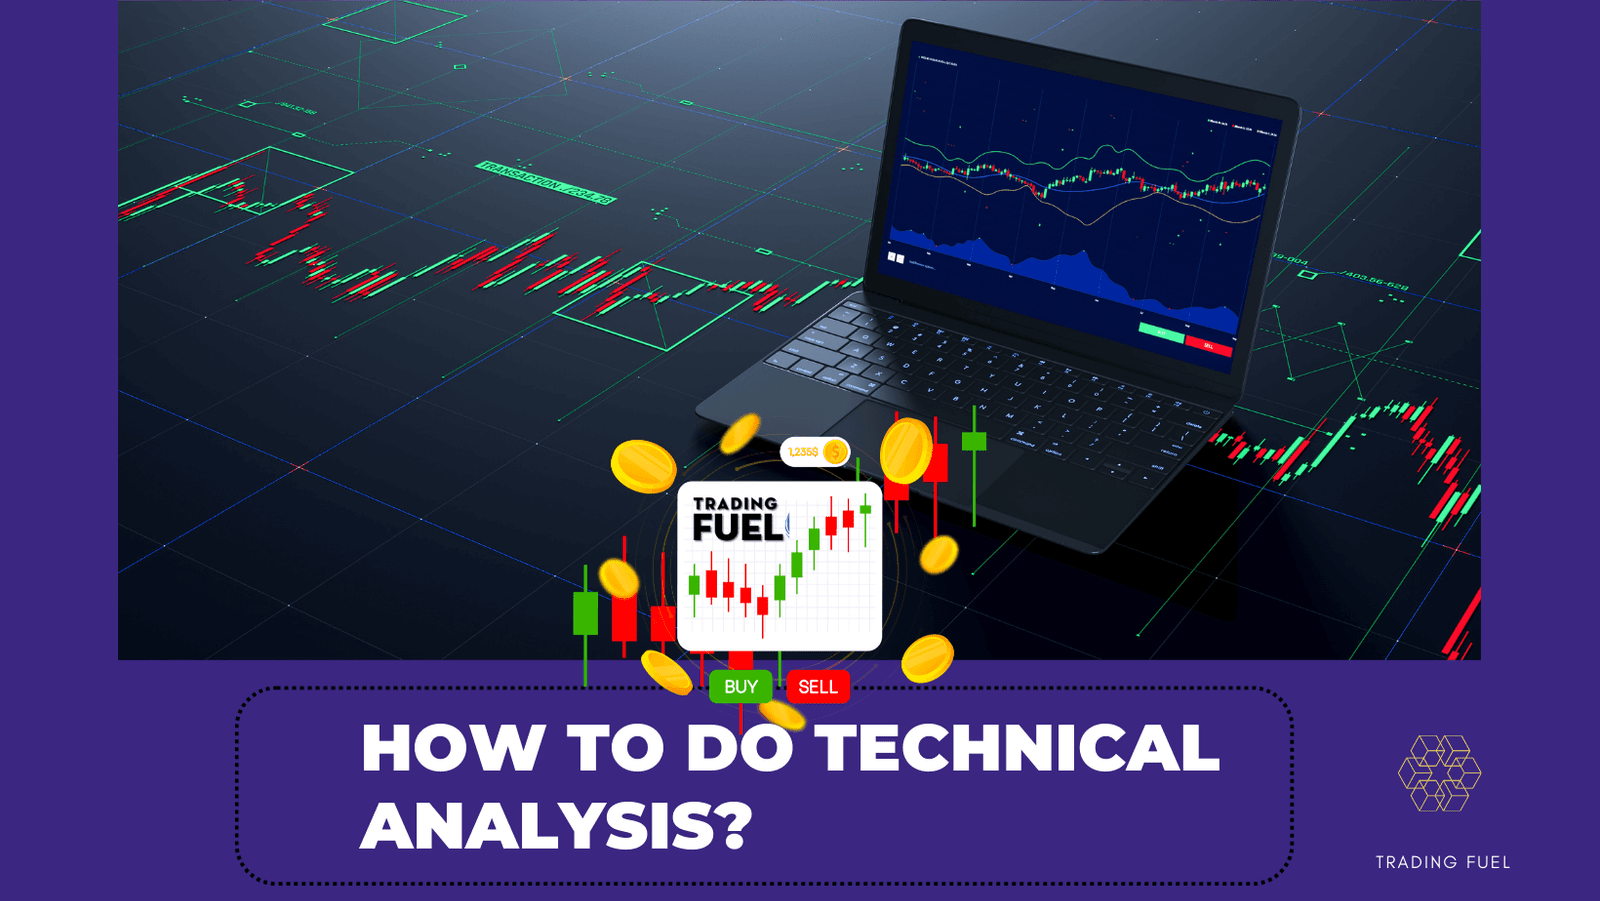 How to do Technical Analysis?